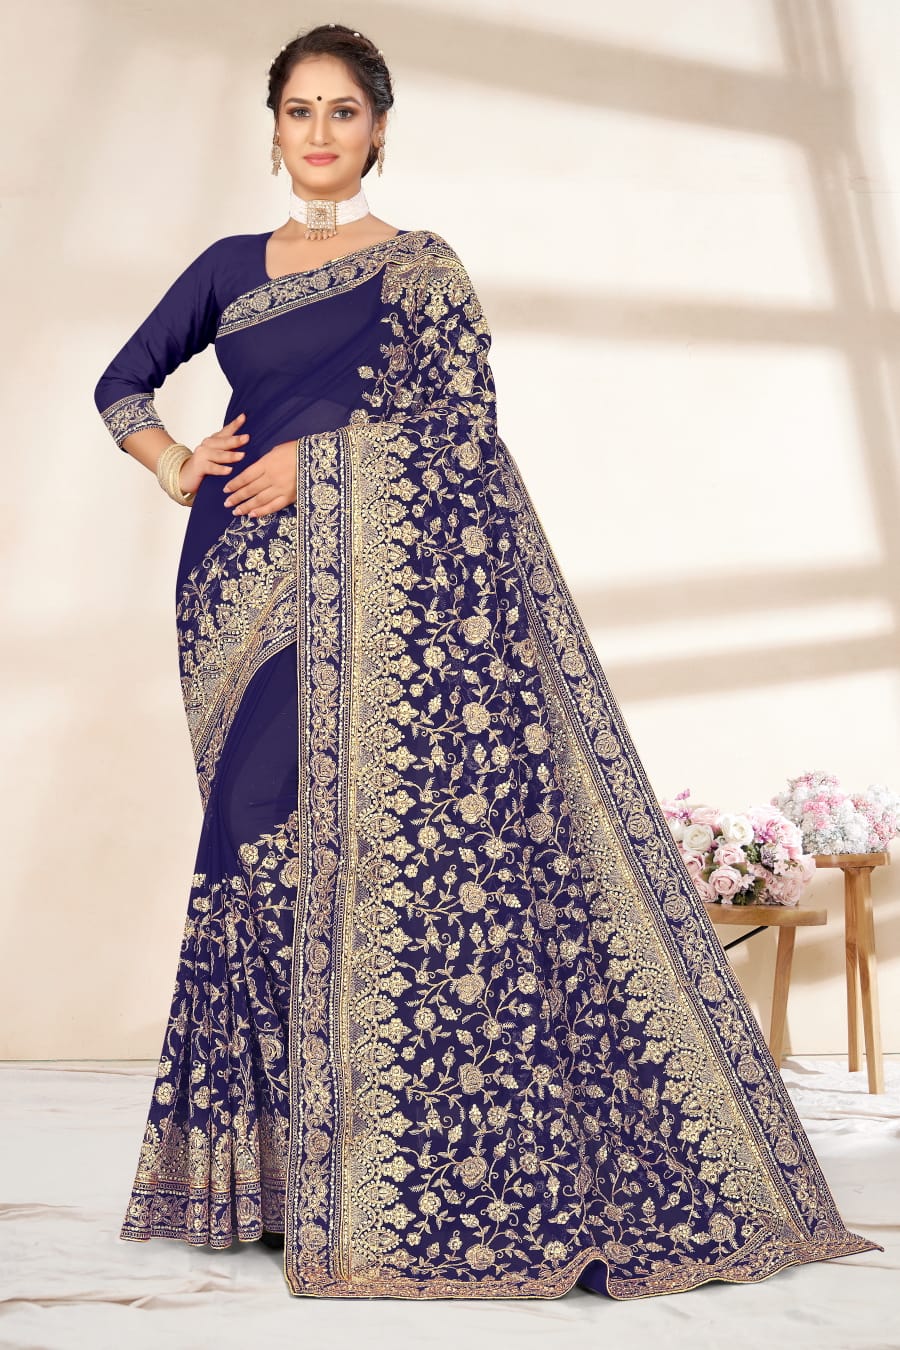 HEAVY DULHAN SAREE WITH JARI WORK ON ALL-OVER THE PALLU AND BORDER.